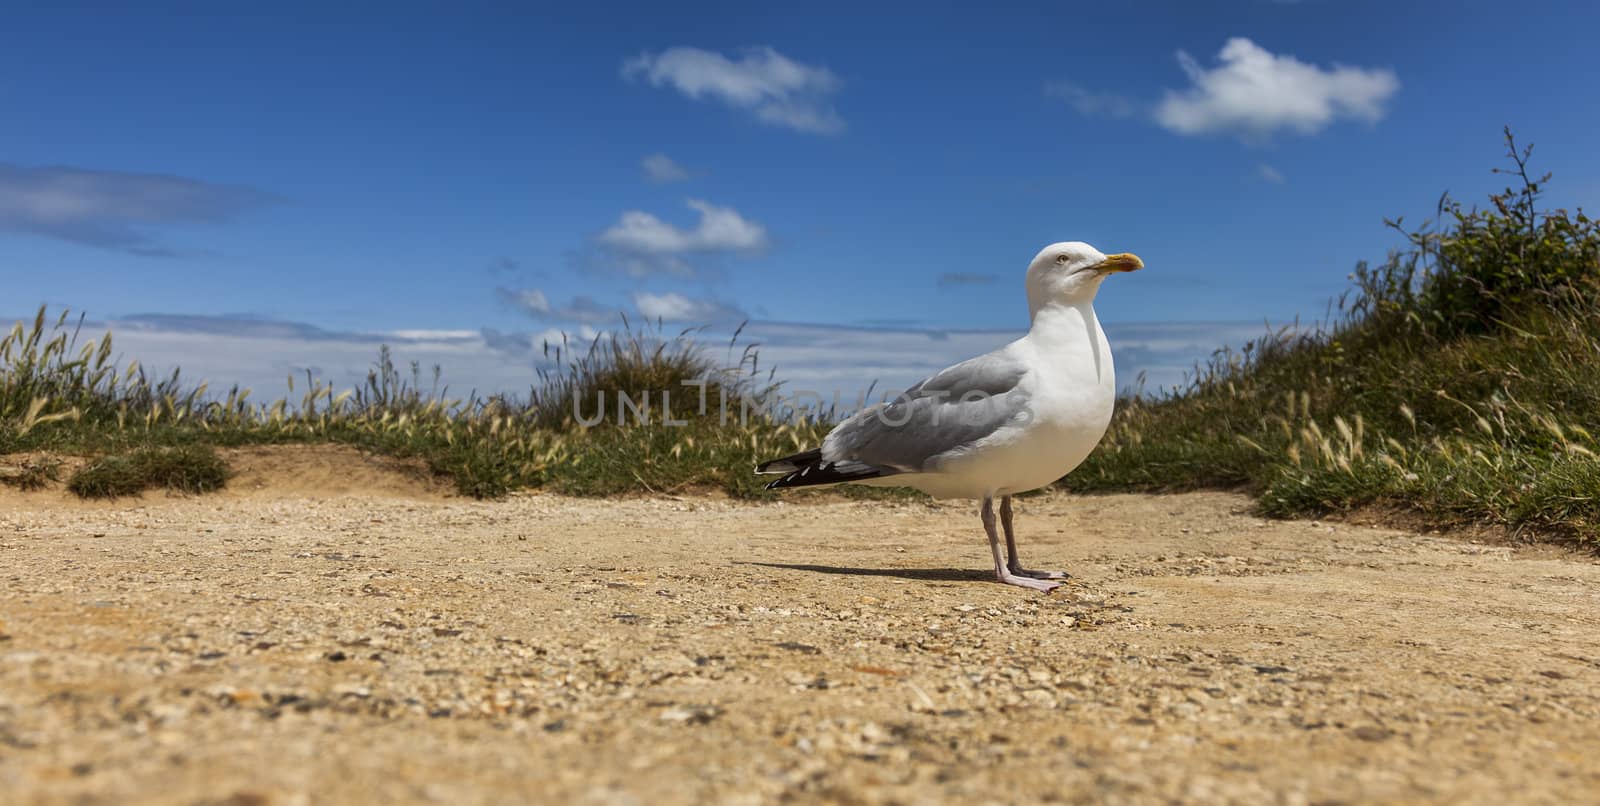 Image of The European Herring Gull (Larus argentatus) on a small plateau over the Etretat cliffs in Upper Normandy in Northern France.